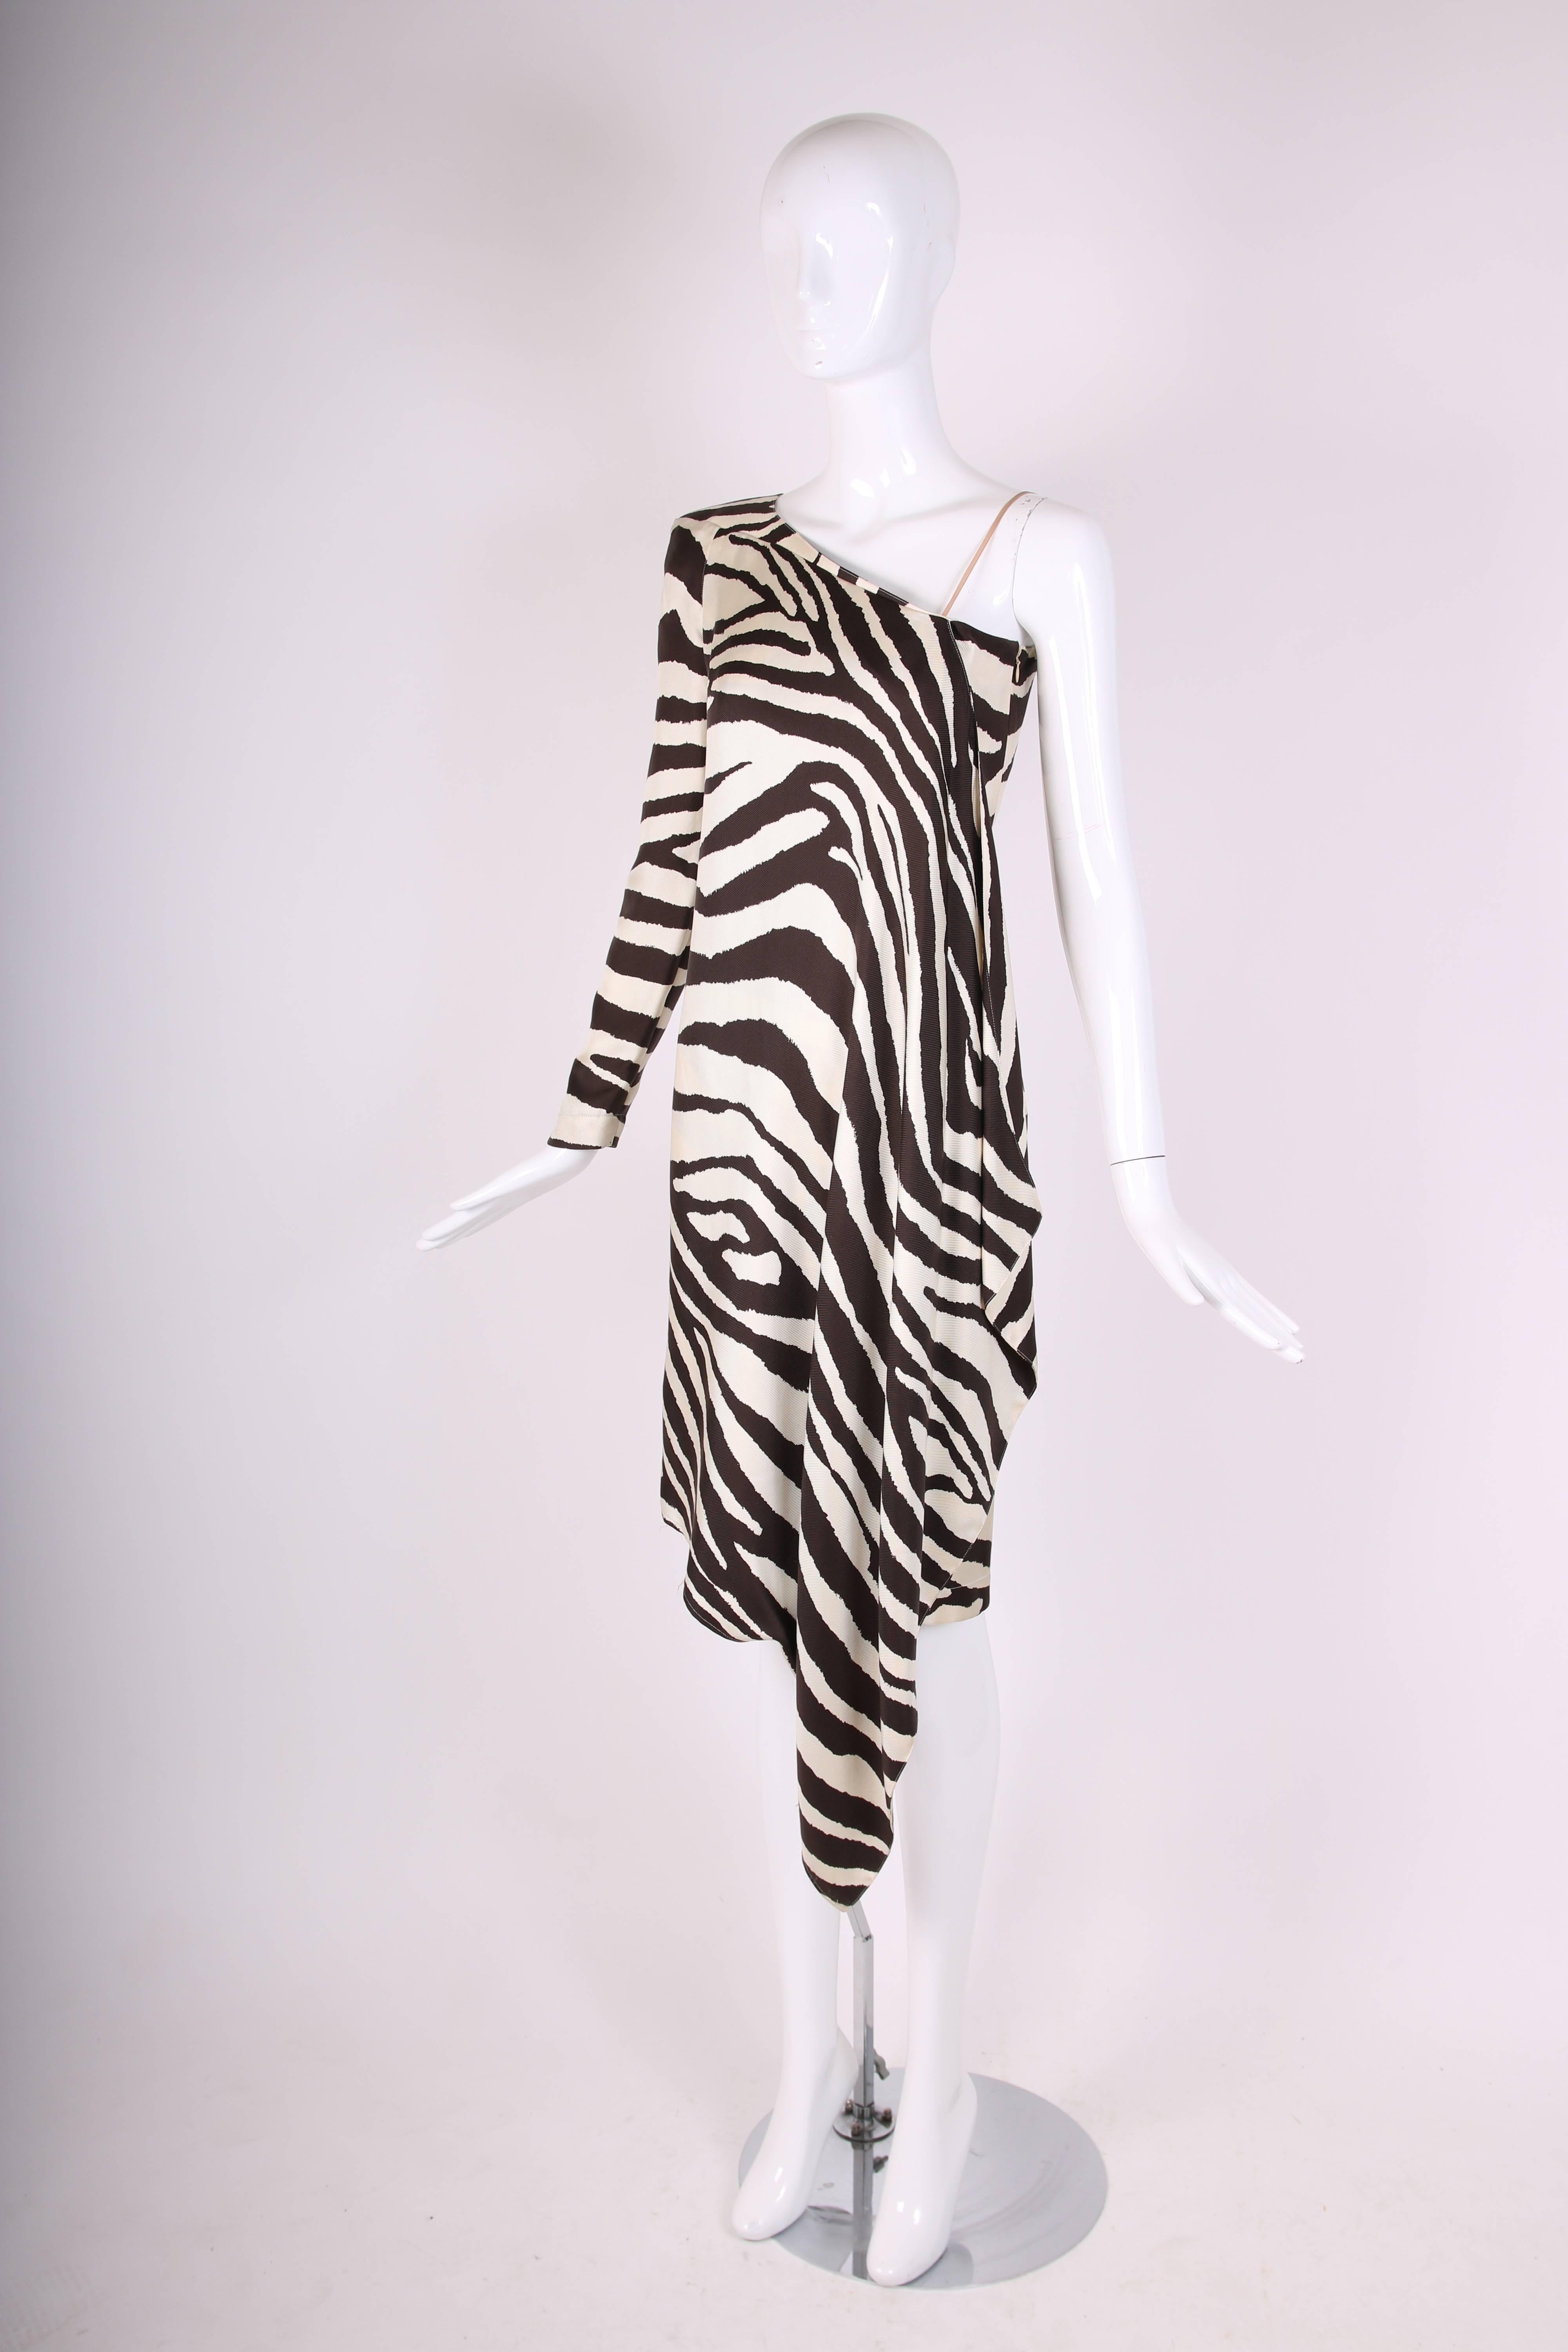 1998 Spring/Summer Thierry Mugler silk twill asymmetrical cocktail dress with iconic Mugler zebra print. This dress has one long sleeve with architectural shoulder and soft draping on the other. There is a side zip closure. Size tag 36.
Measurements